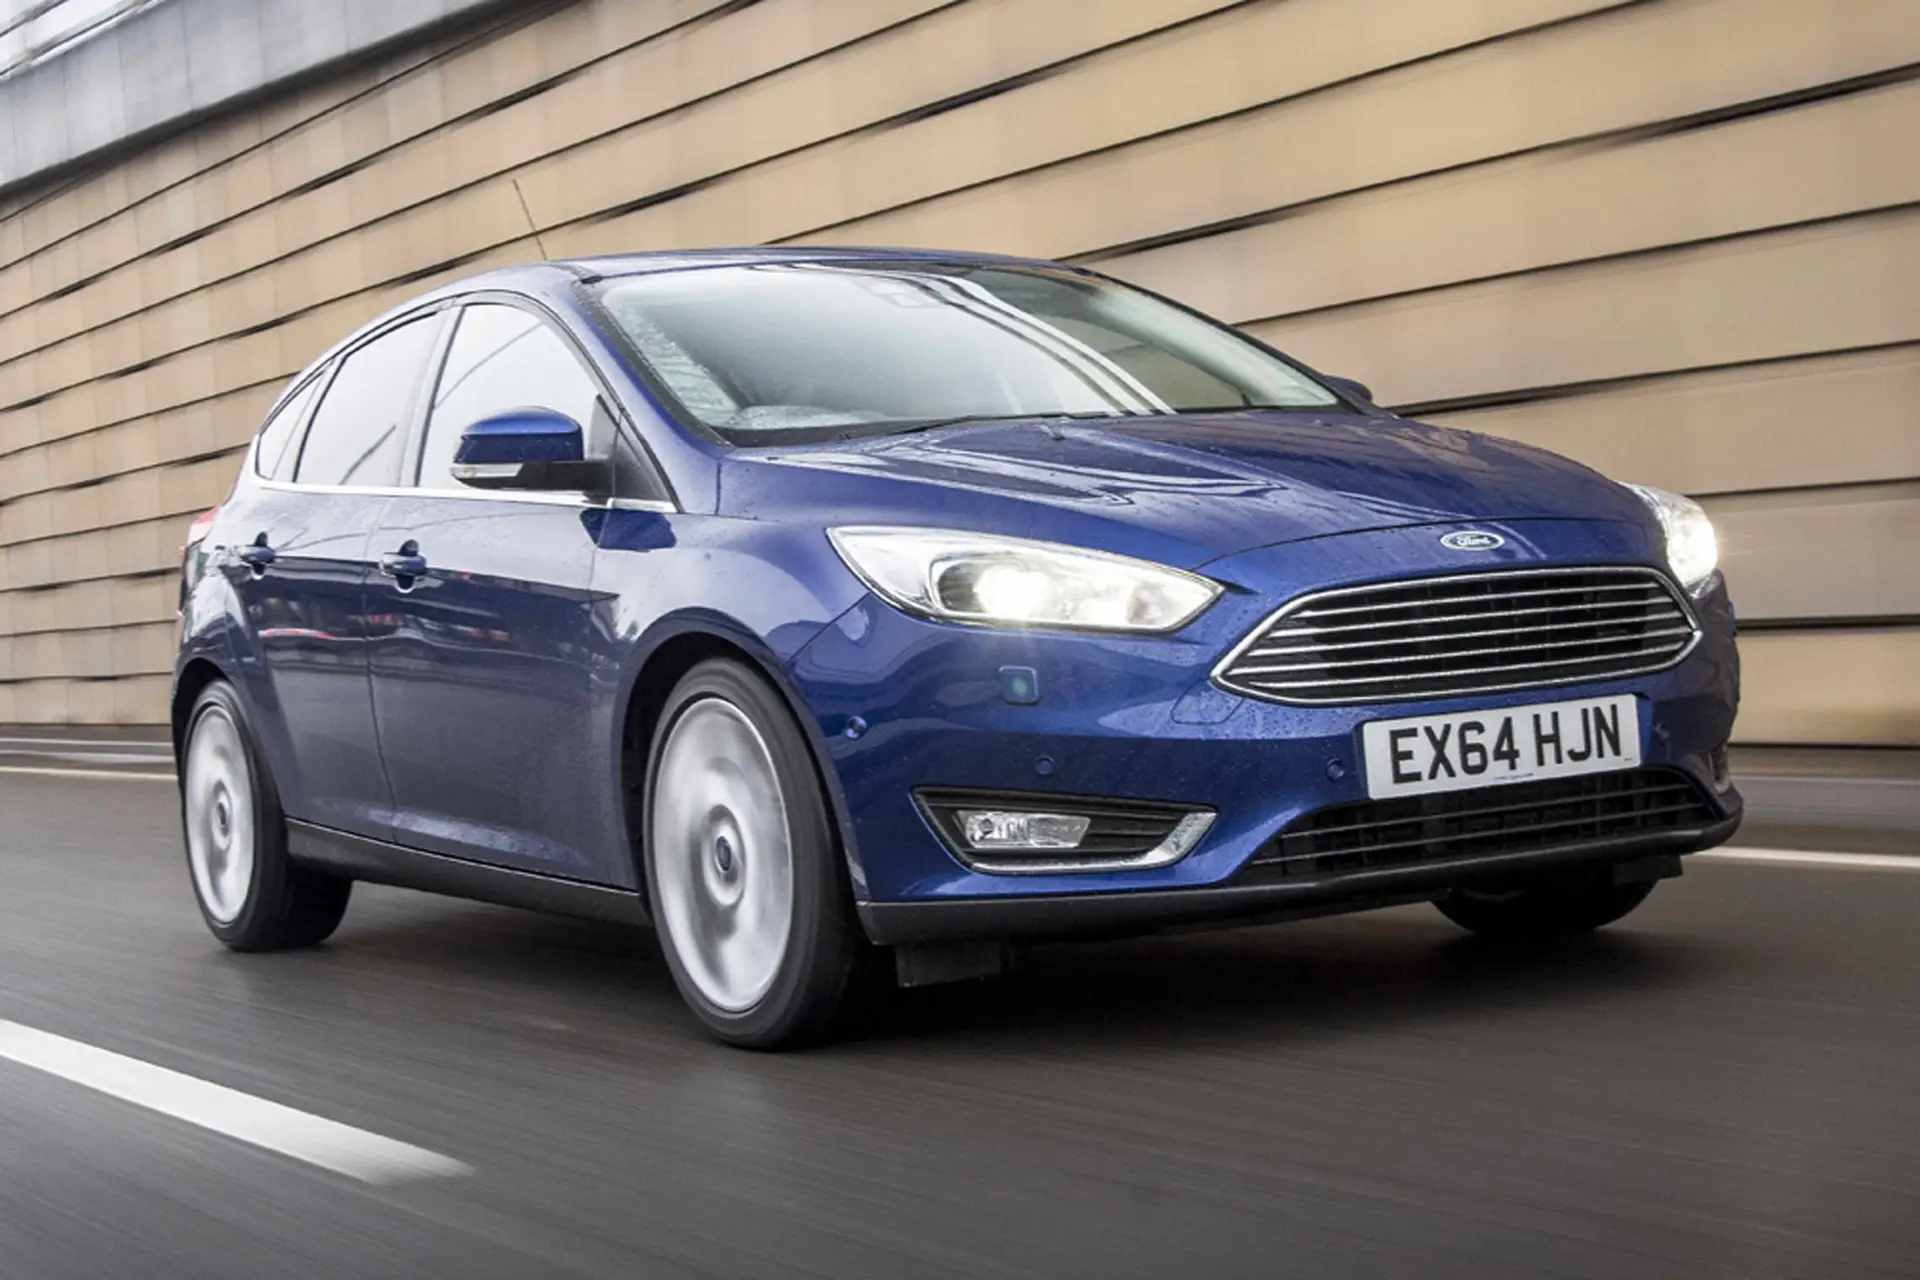 Ford Focus (2014-2018) Review: exterior front three quarter photo of the Ford Focus on the road